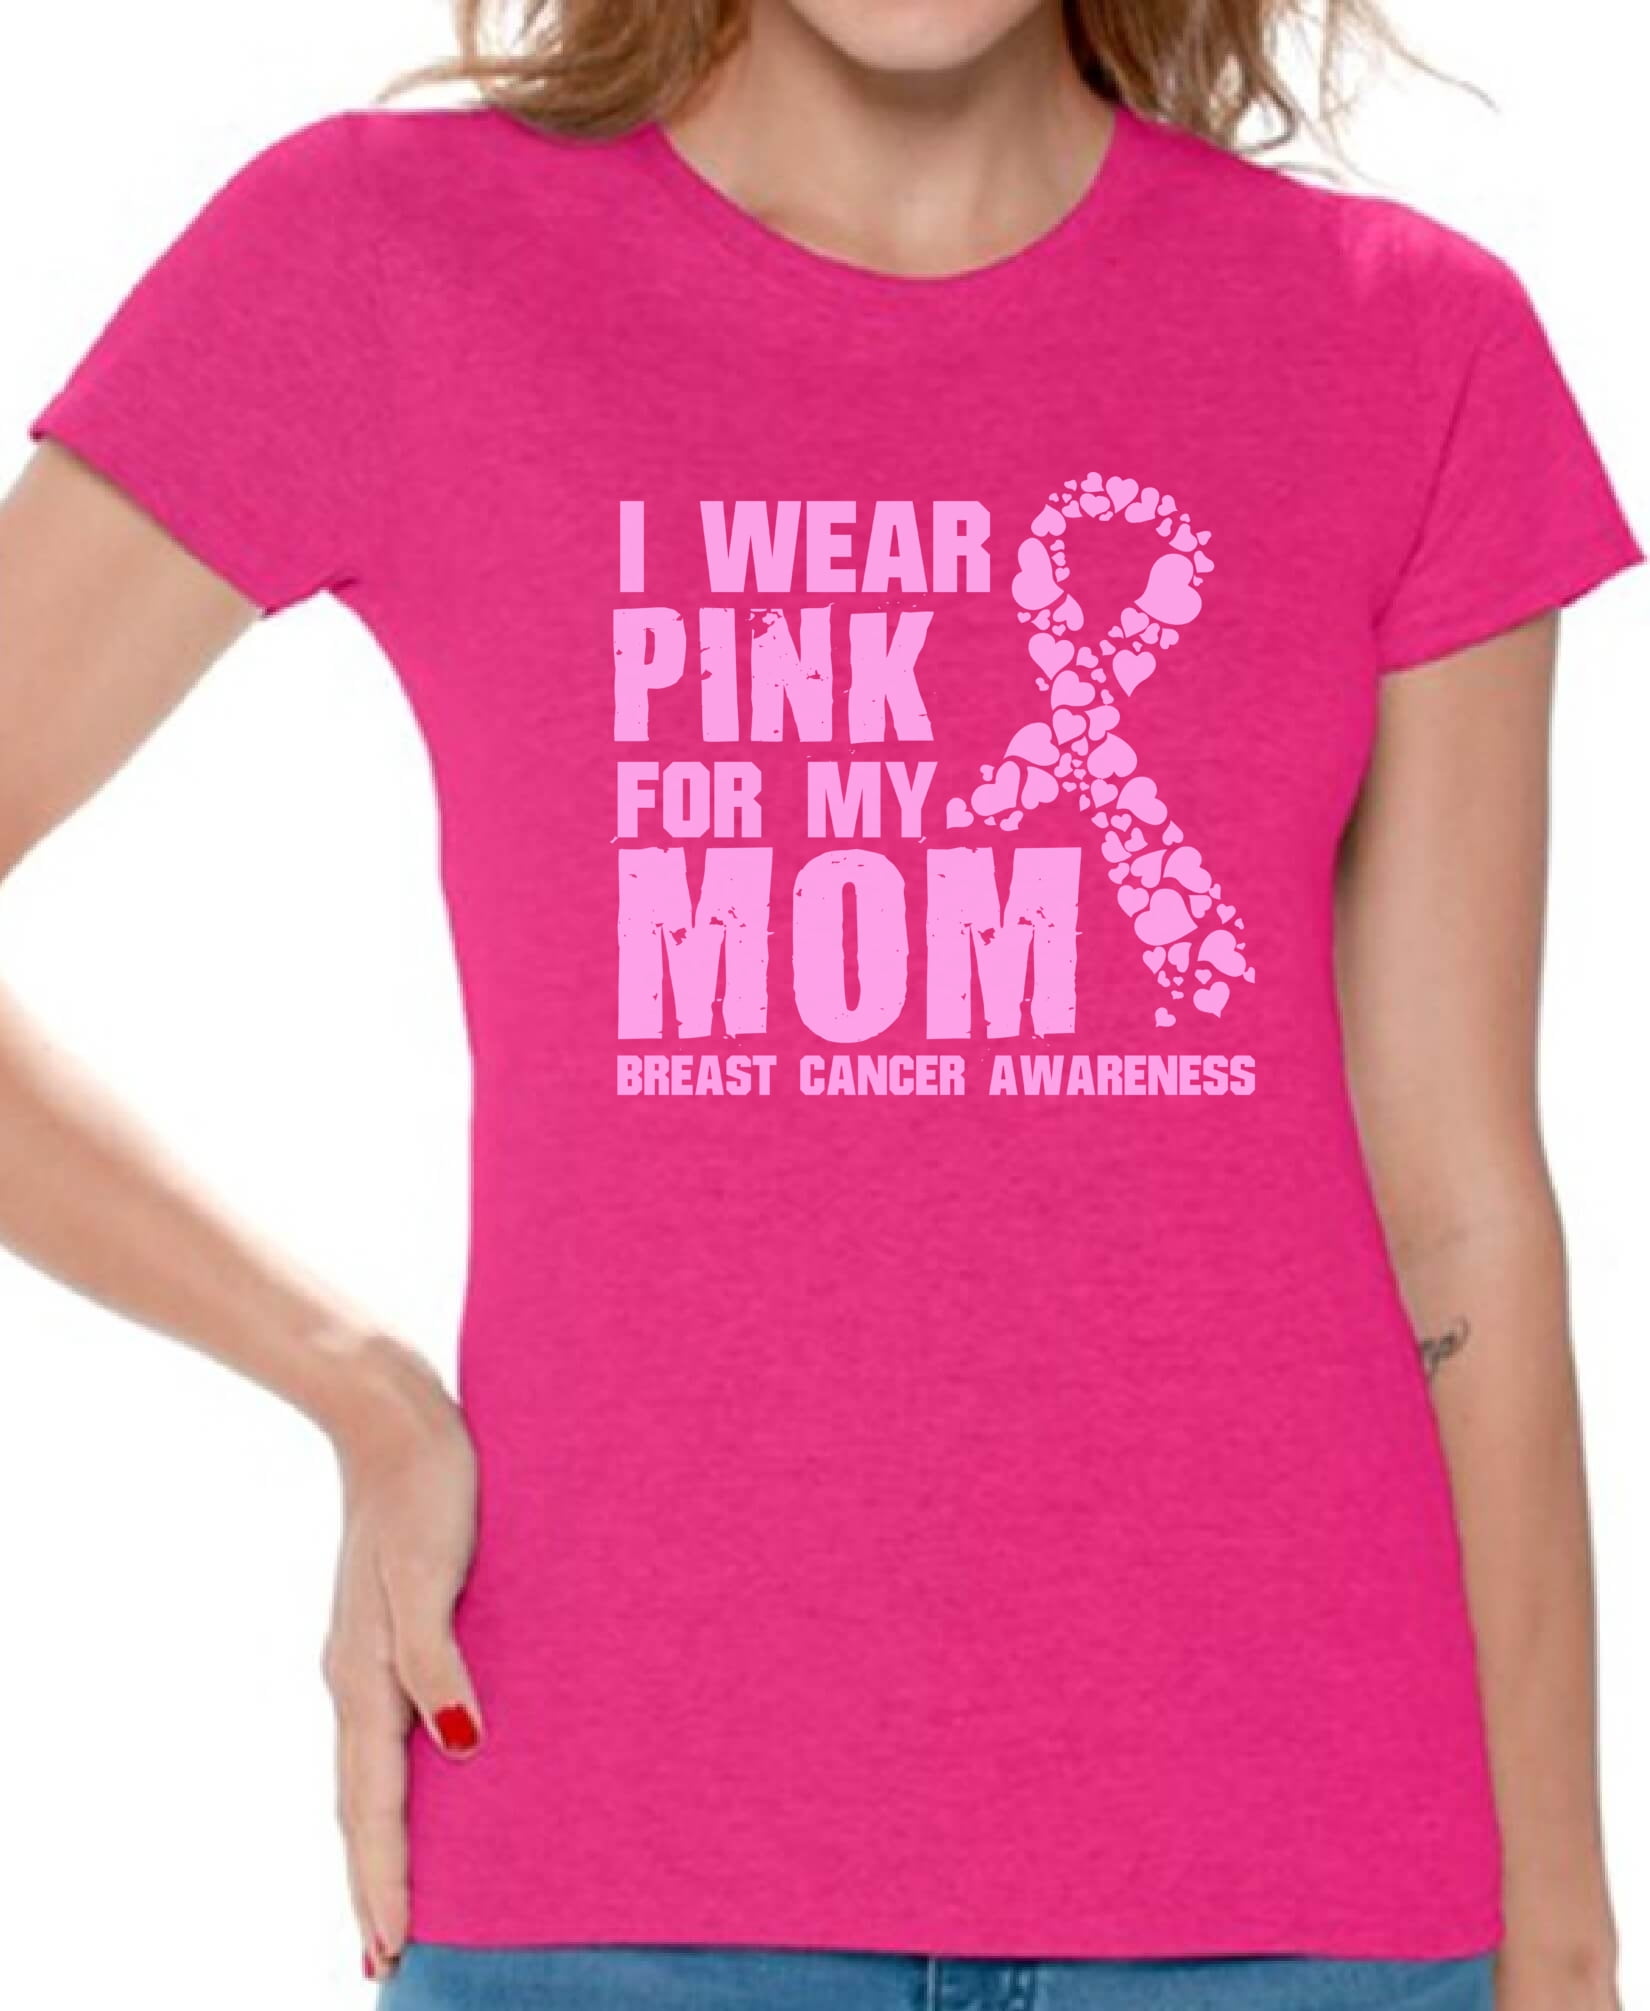 Cancer Awareness Shirt Cancer Support Shirt Fight Cancer In All Colors Shirt